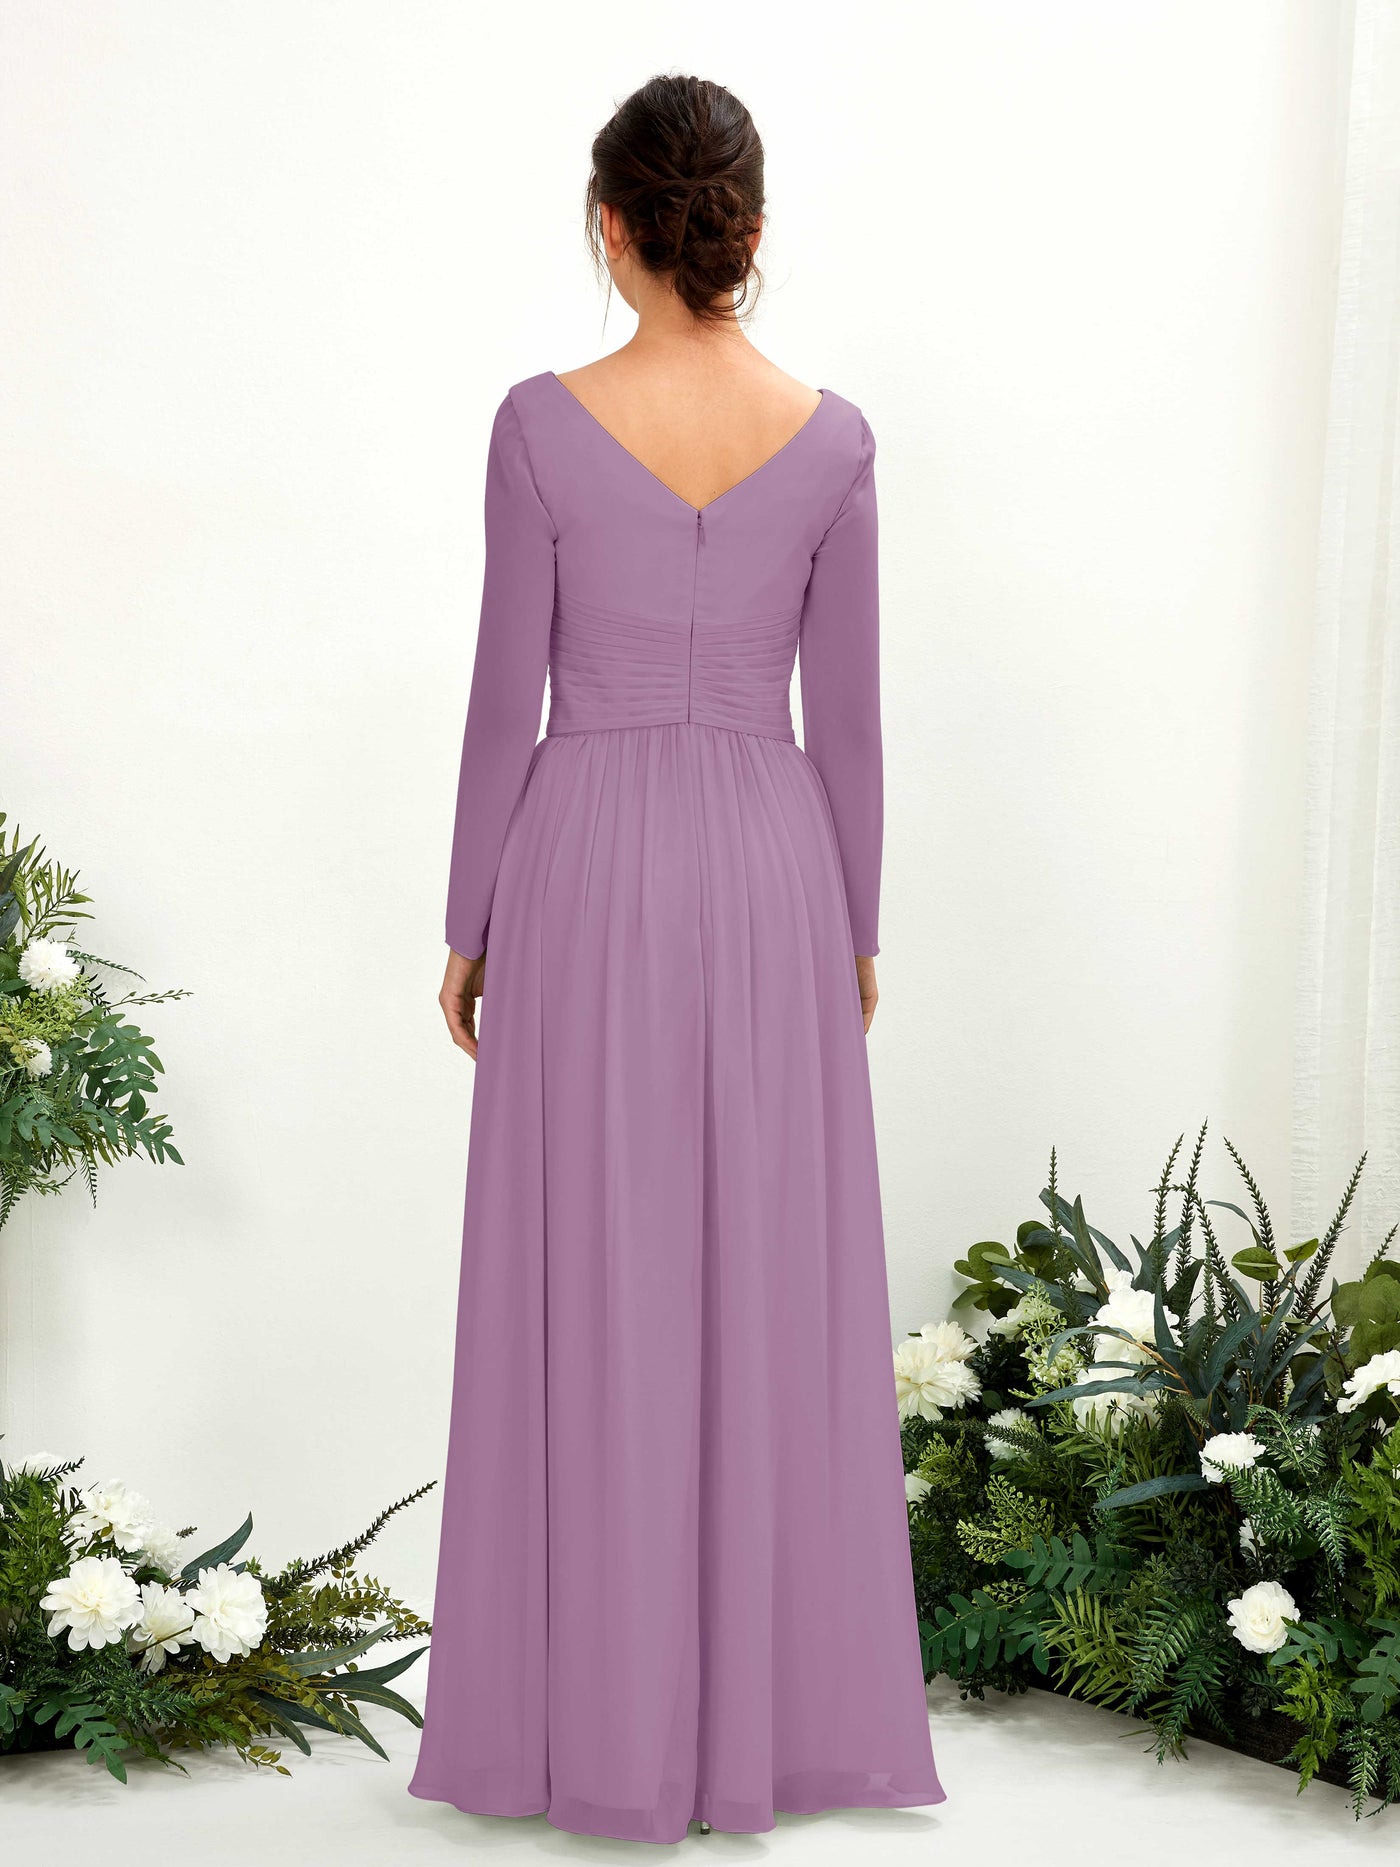 Orchid Mist Bridesmaid Dresses Bridesmaid Dress A-line Chiffon V-neck Full Length Long Sleeves Wedding Party Dress (81220321)#color_orchid-mist